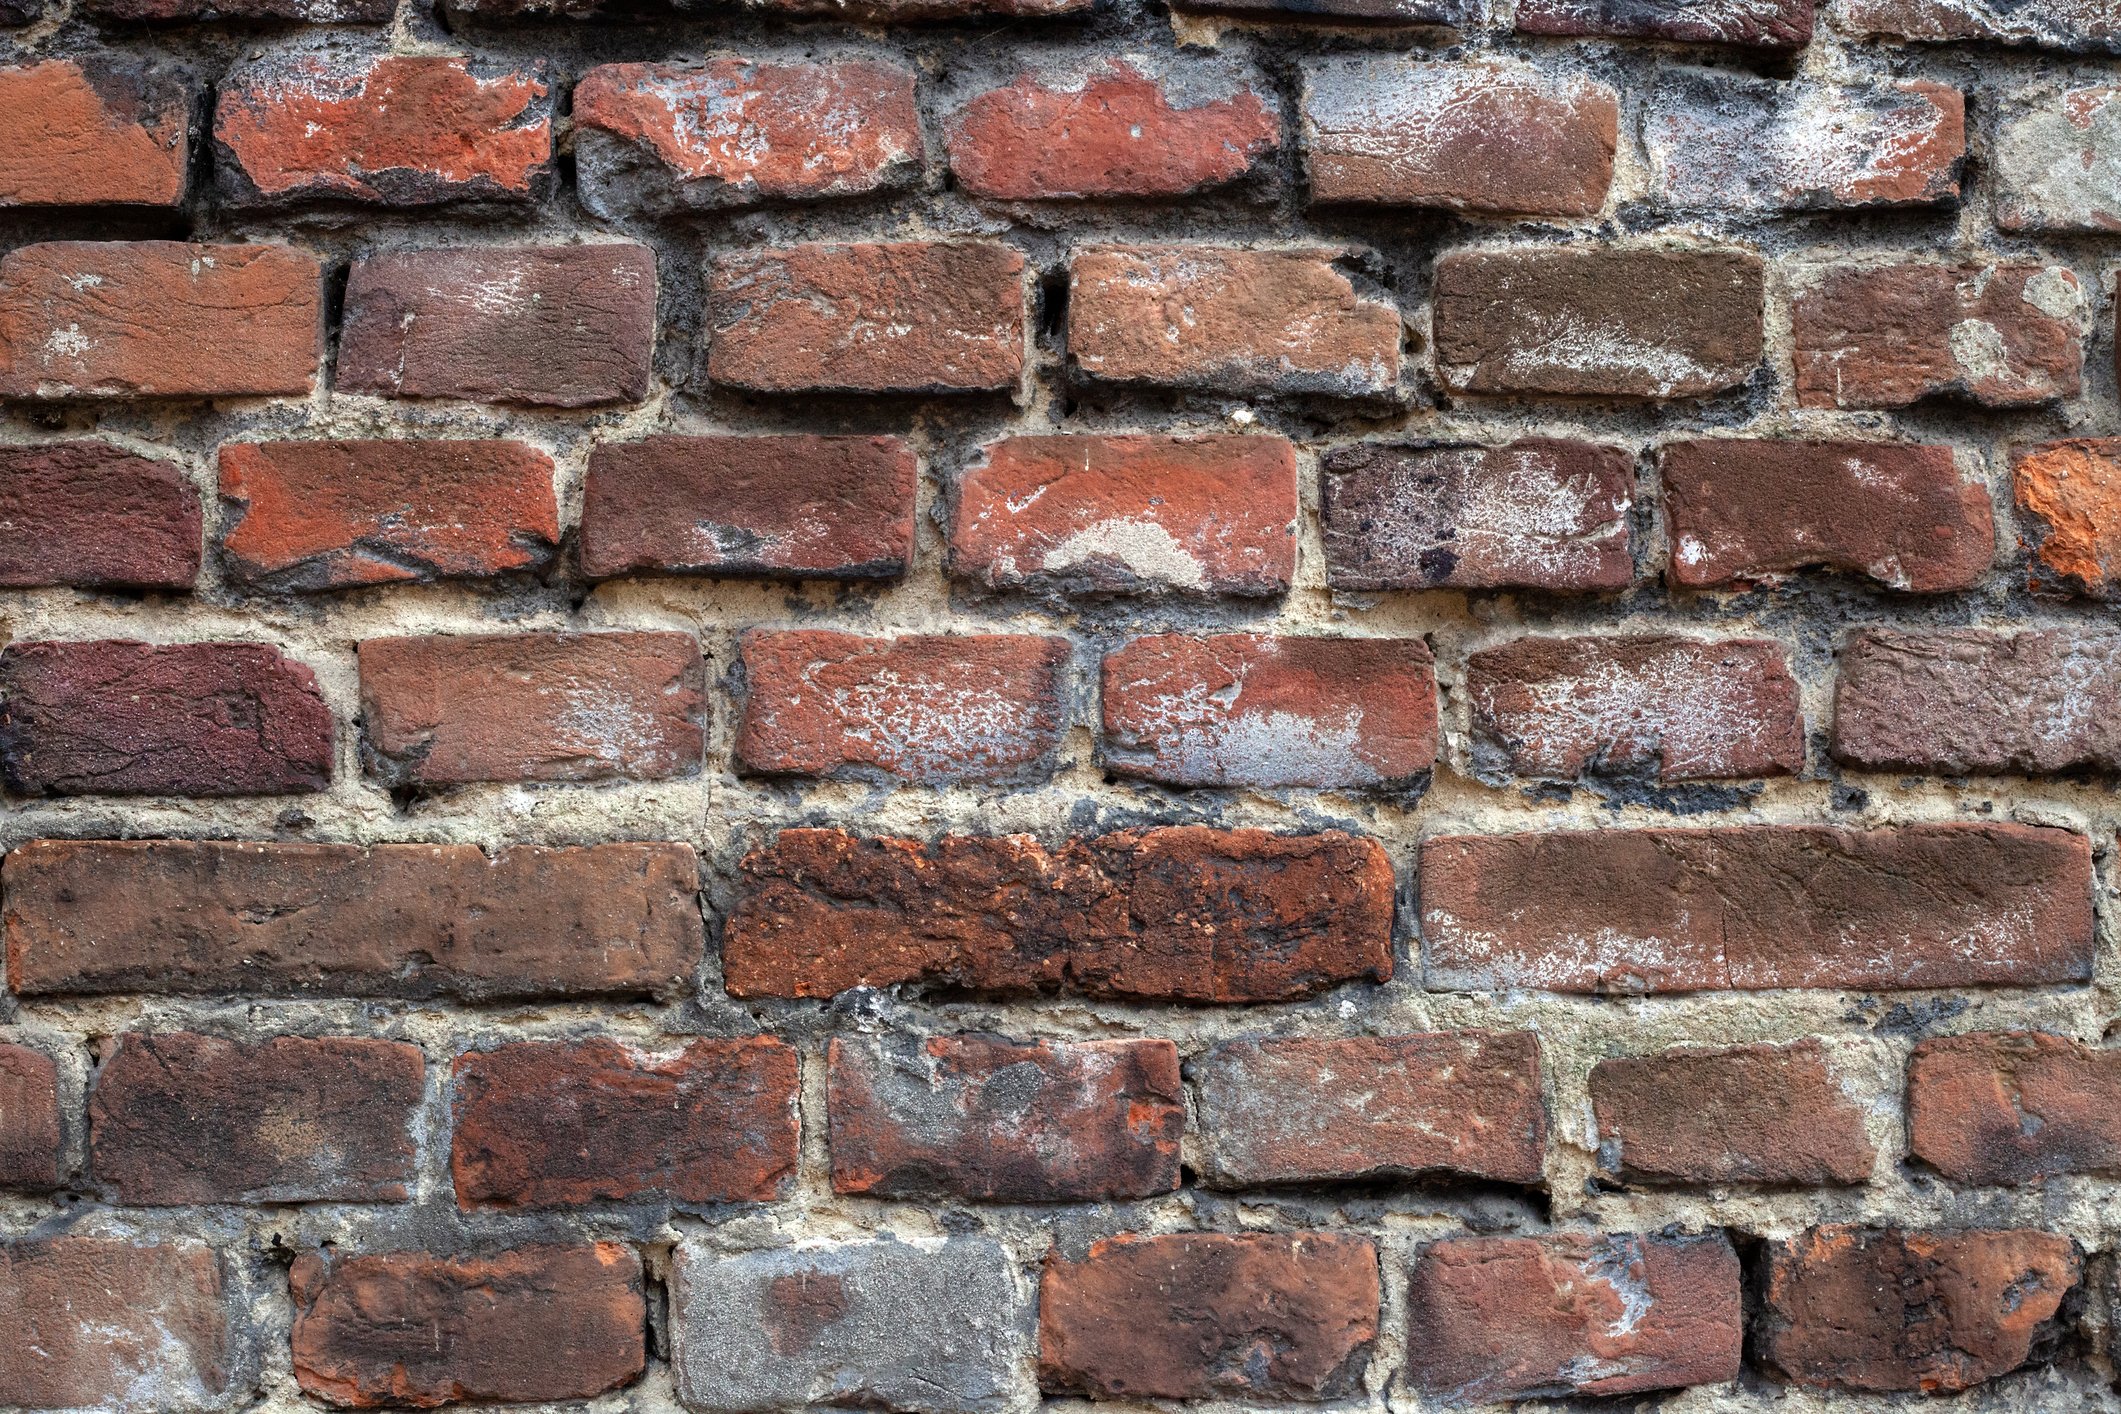 Brick Discoloration Facts